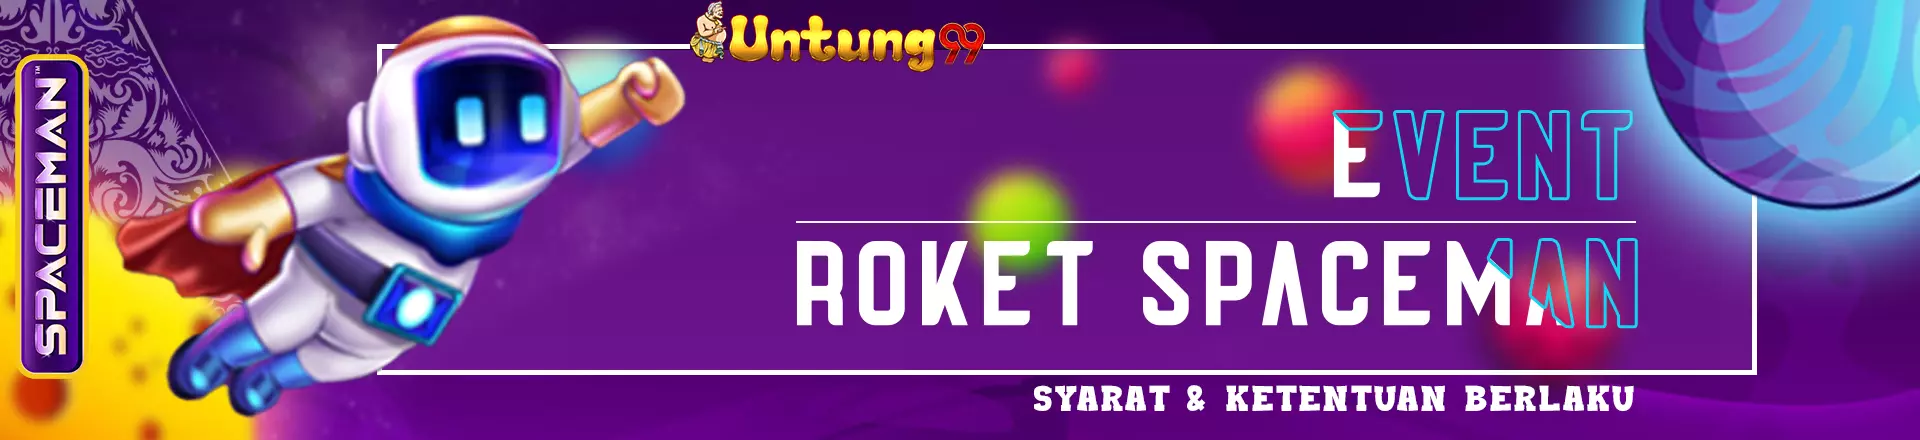 EVENT SPACEMAN UNTUNG99